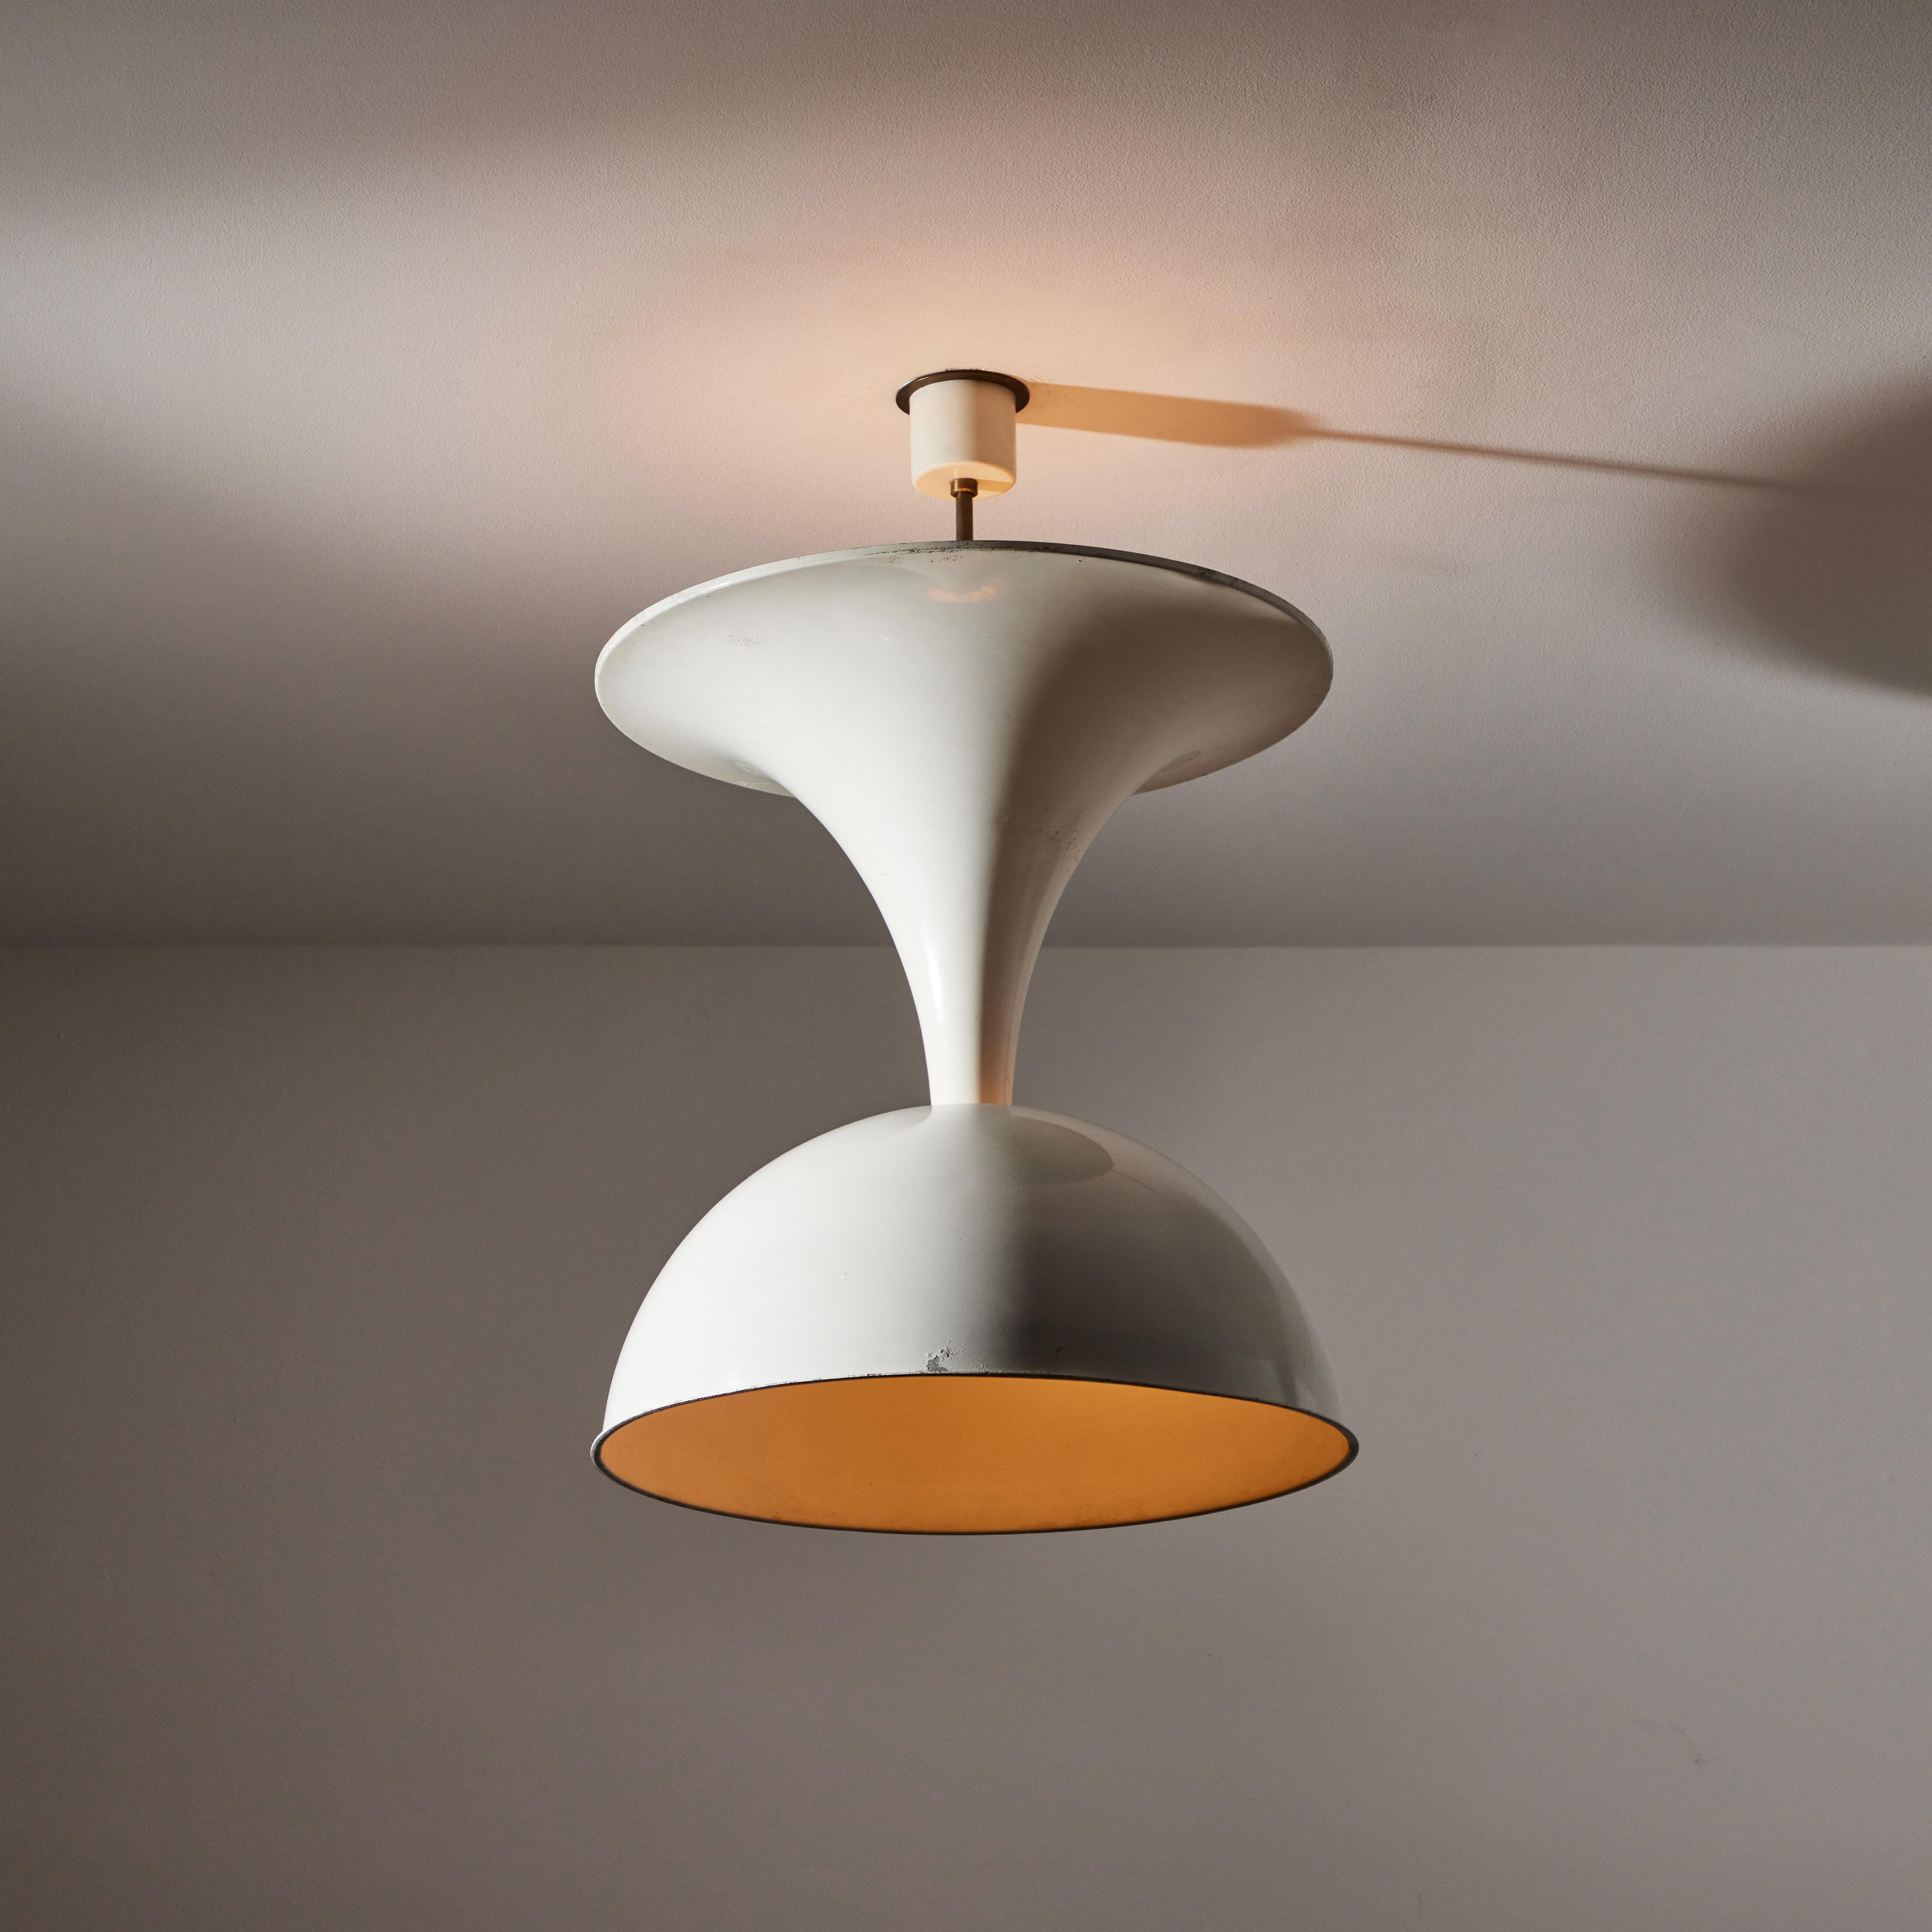 Enameled Sculptural Ceiling Light by Valenti